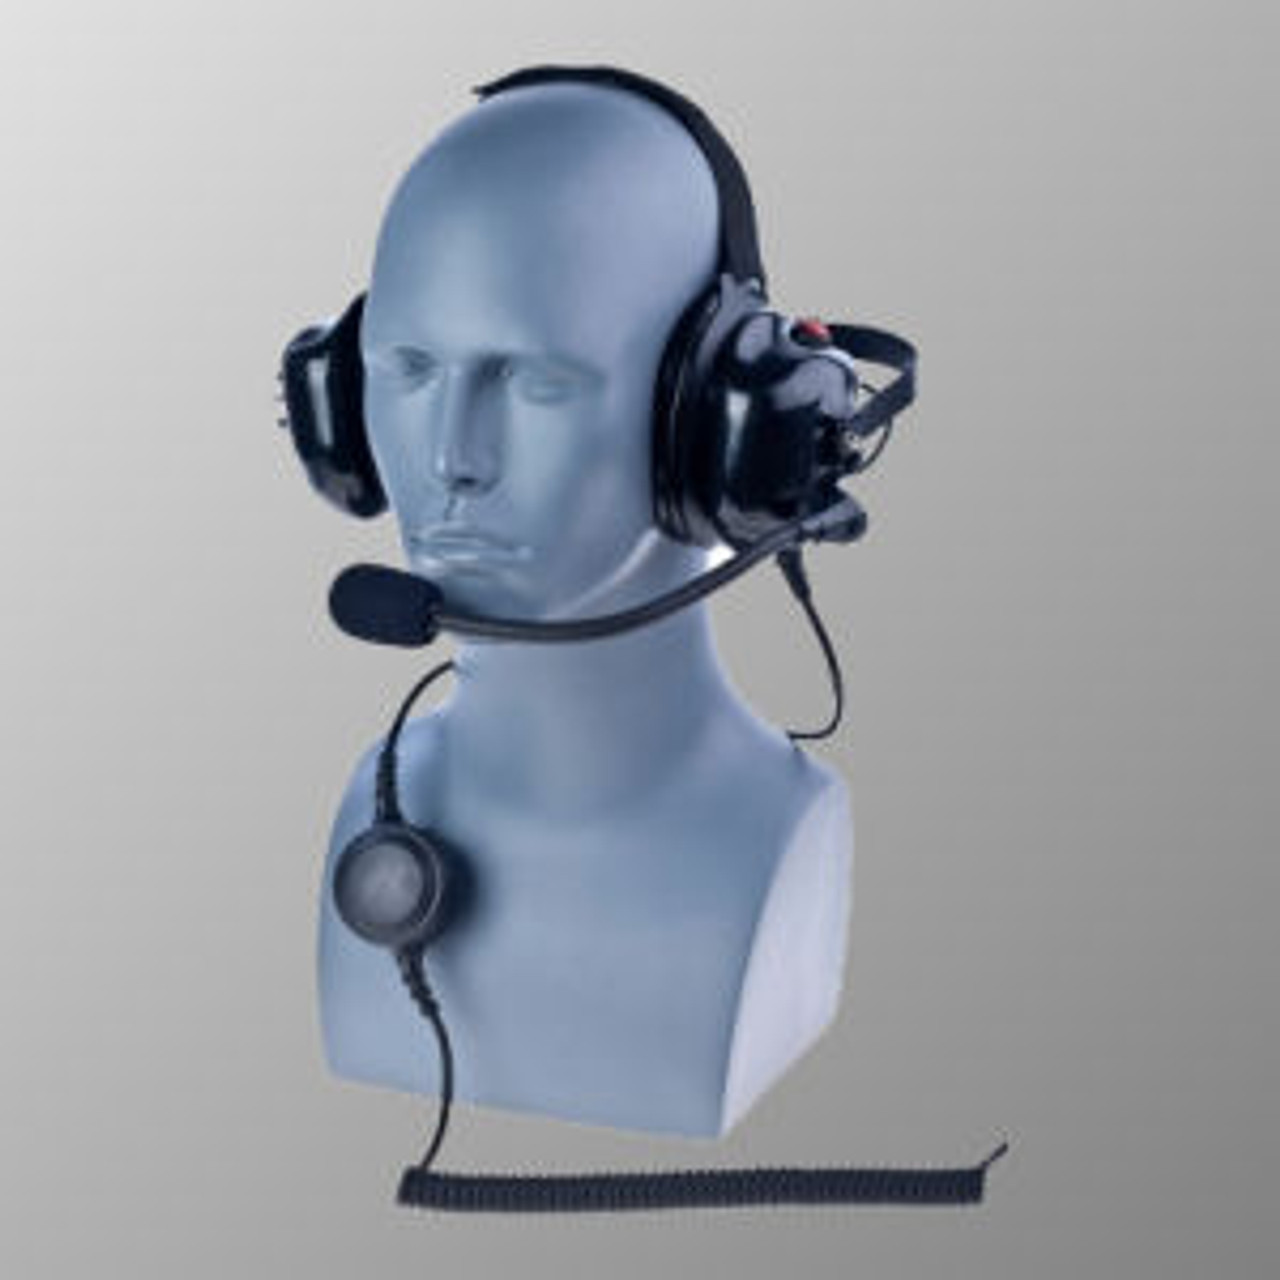 ICOM IC-F80S Noise Canceling Behind The Head Double Muff Headset